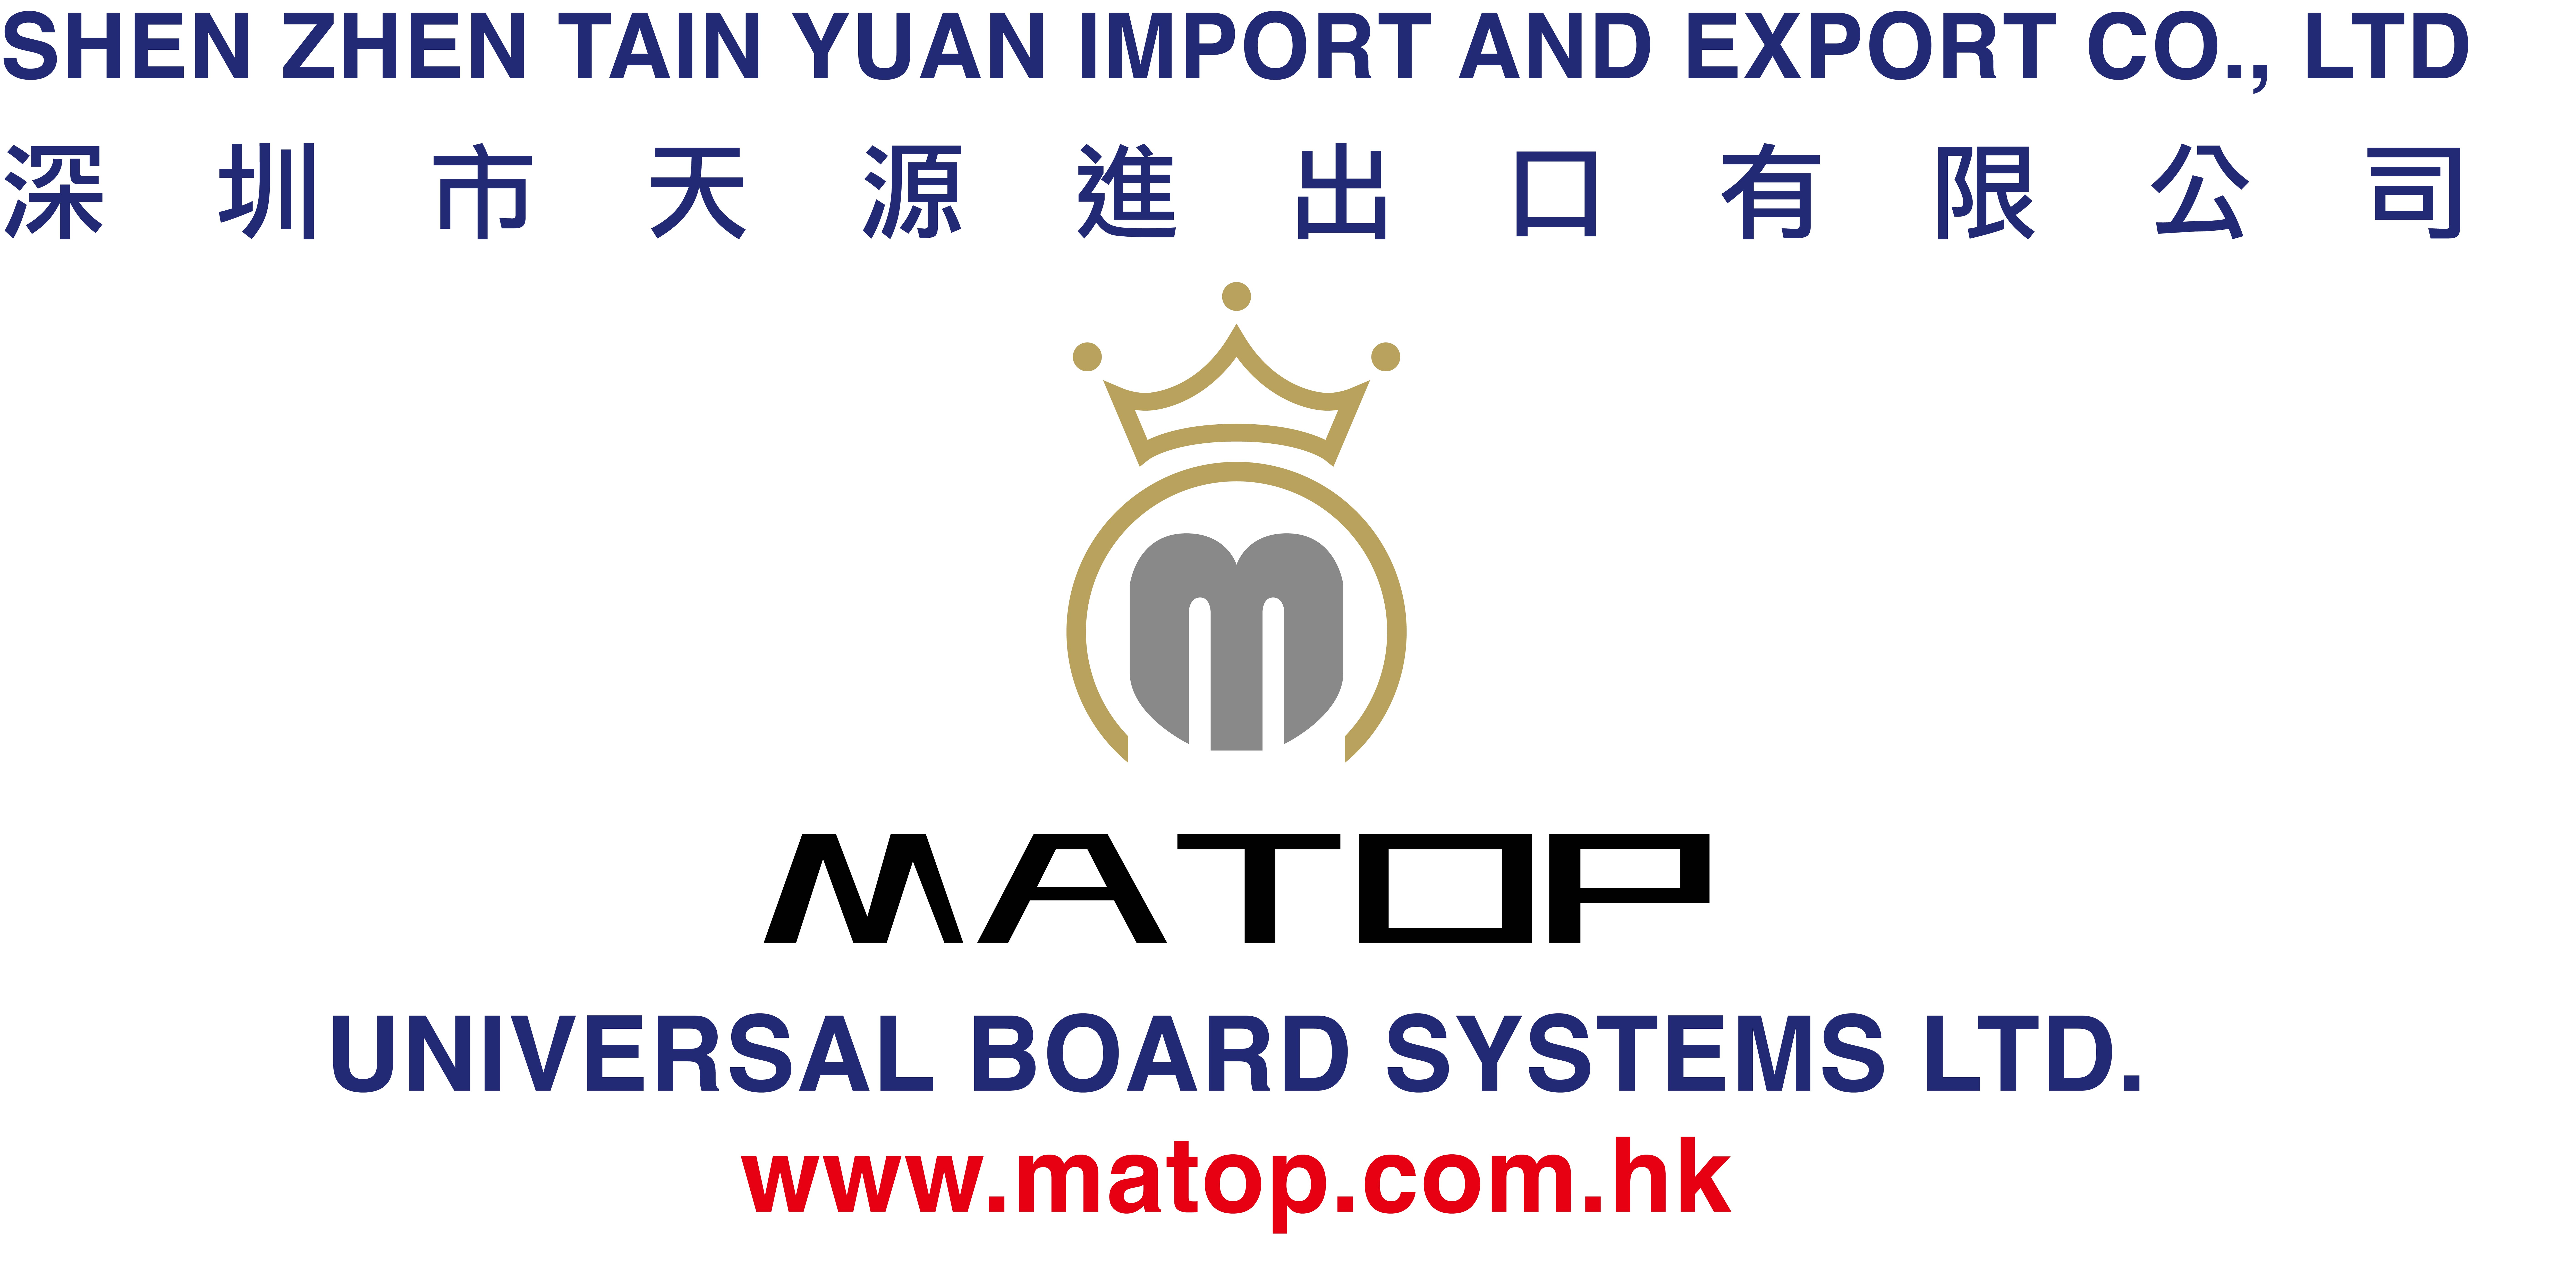 shenzhen day source import ang export limited company